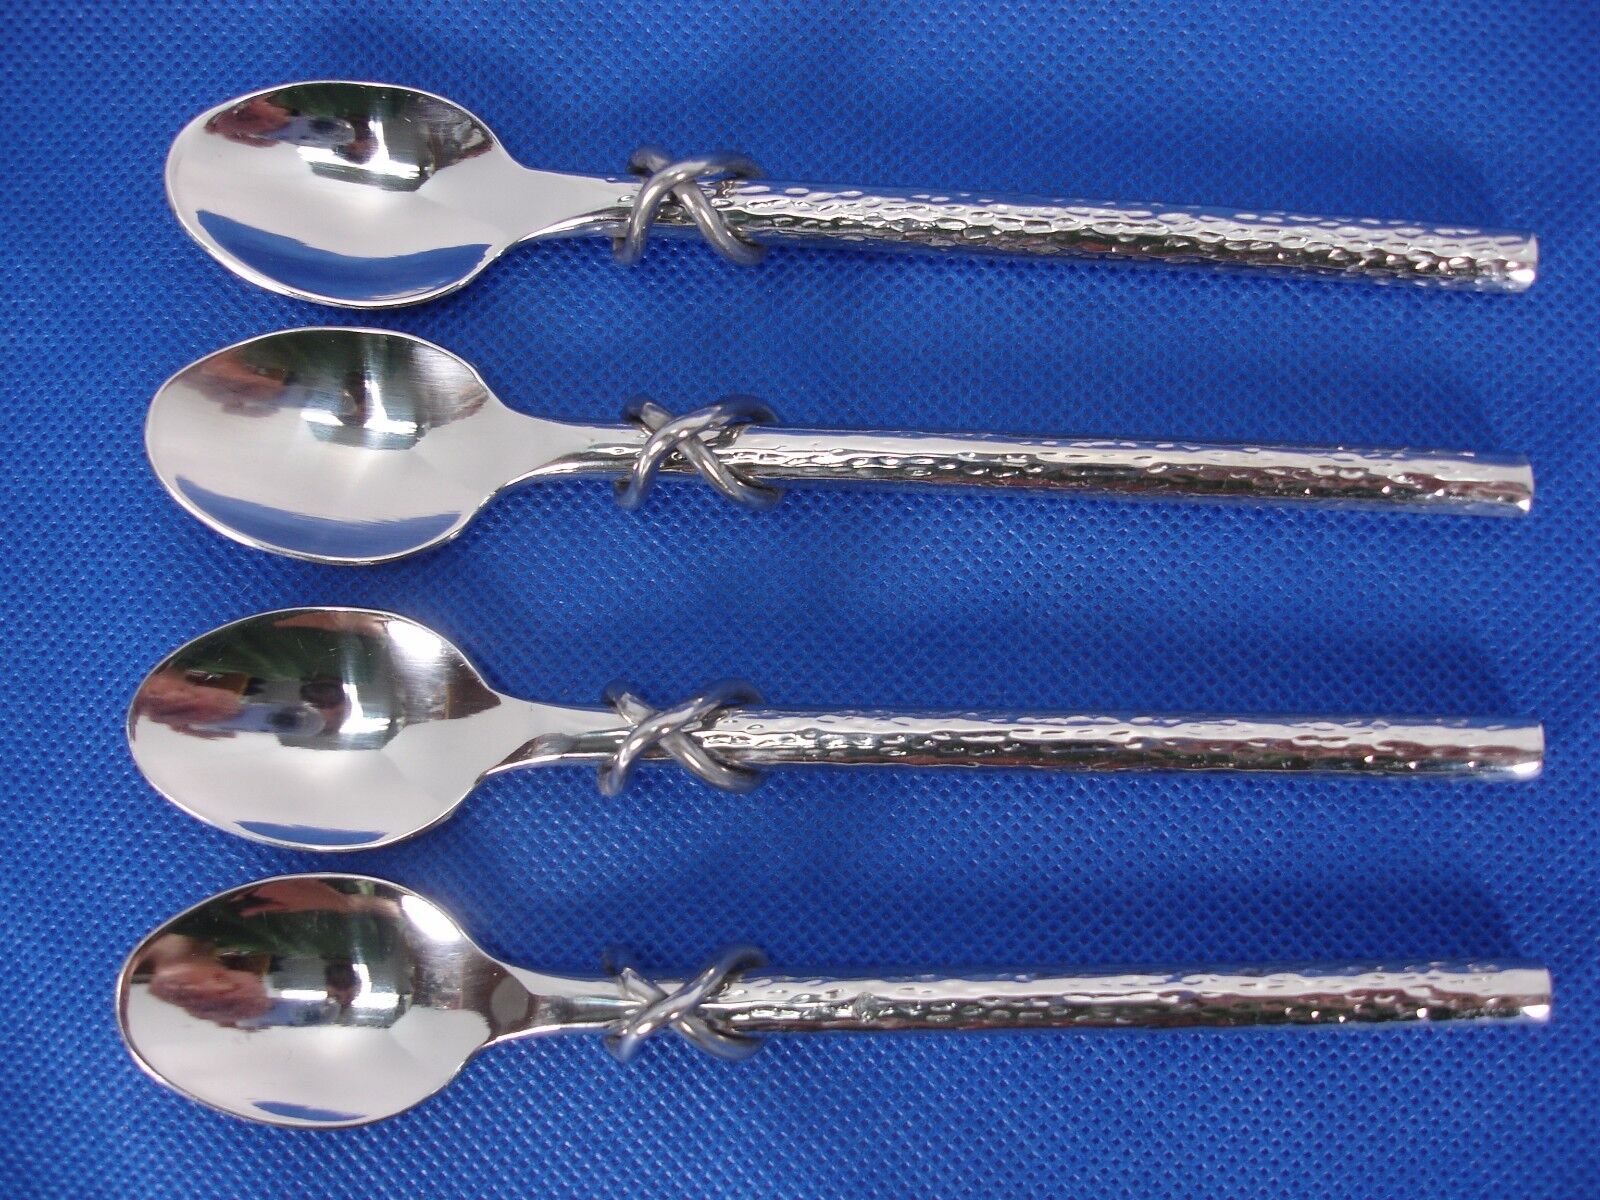 TOWLE LIVING COLLECTION 18/10 CHINA STAINESS STEEL SET OF 4 TEASPOONS SPOONS